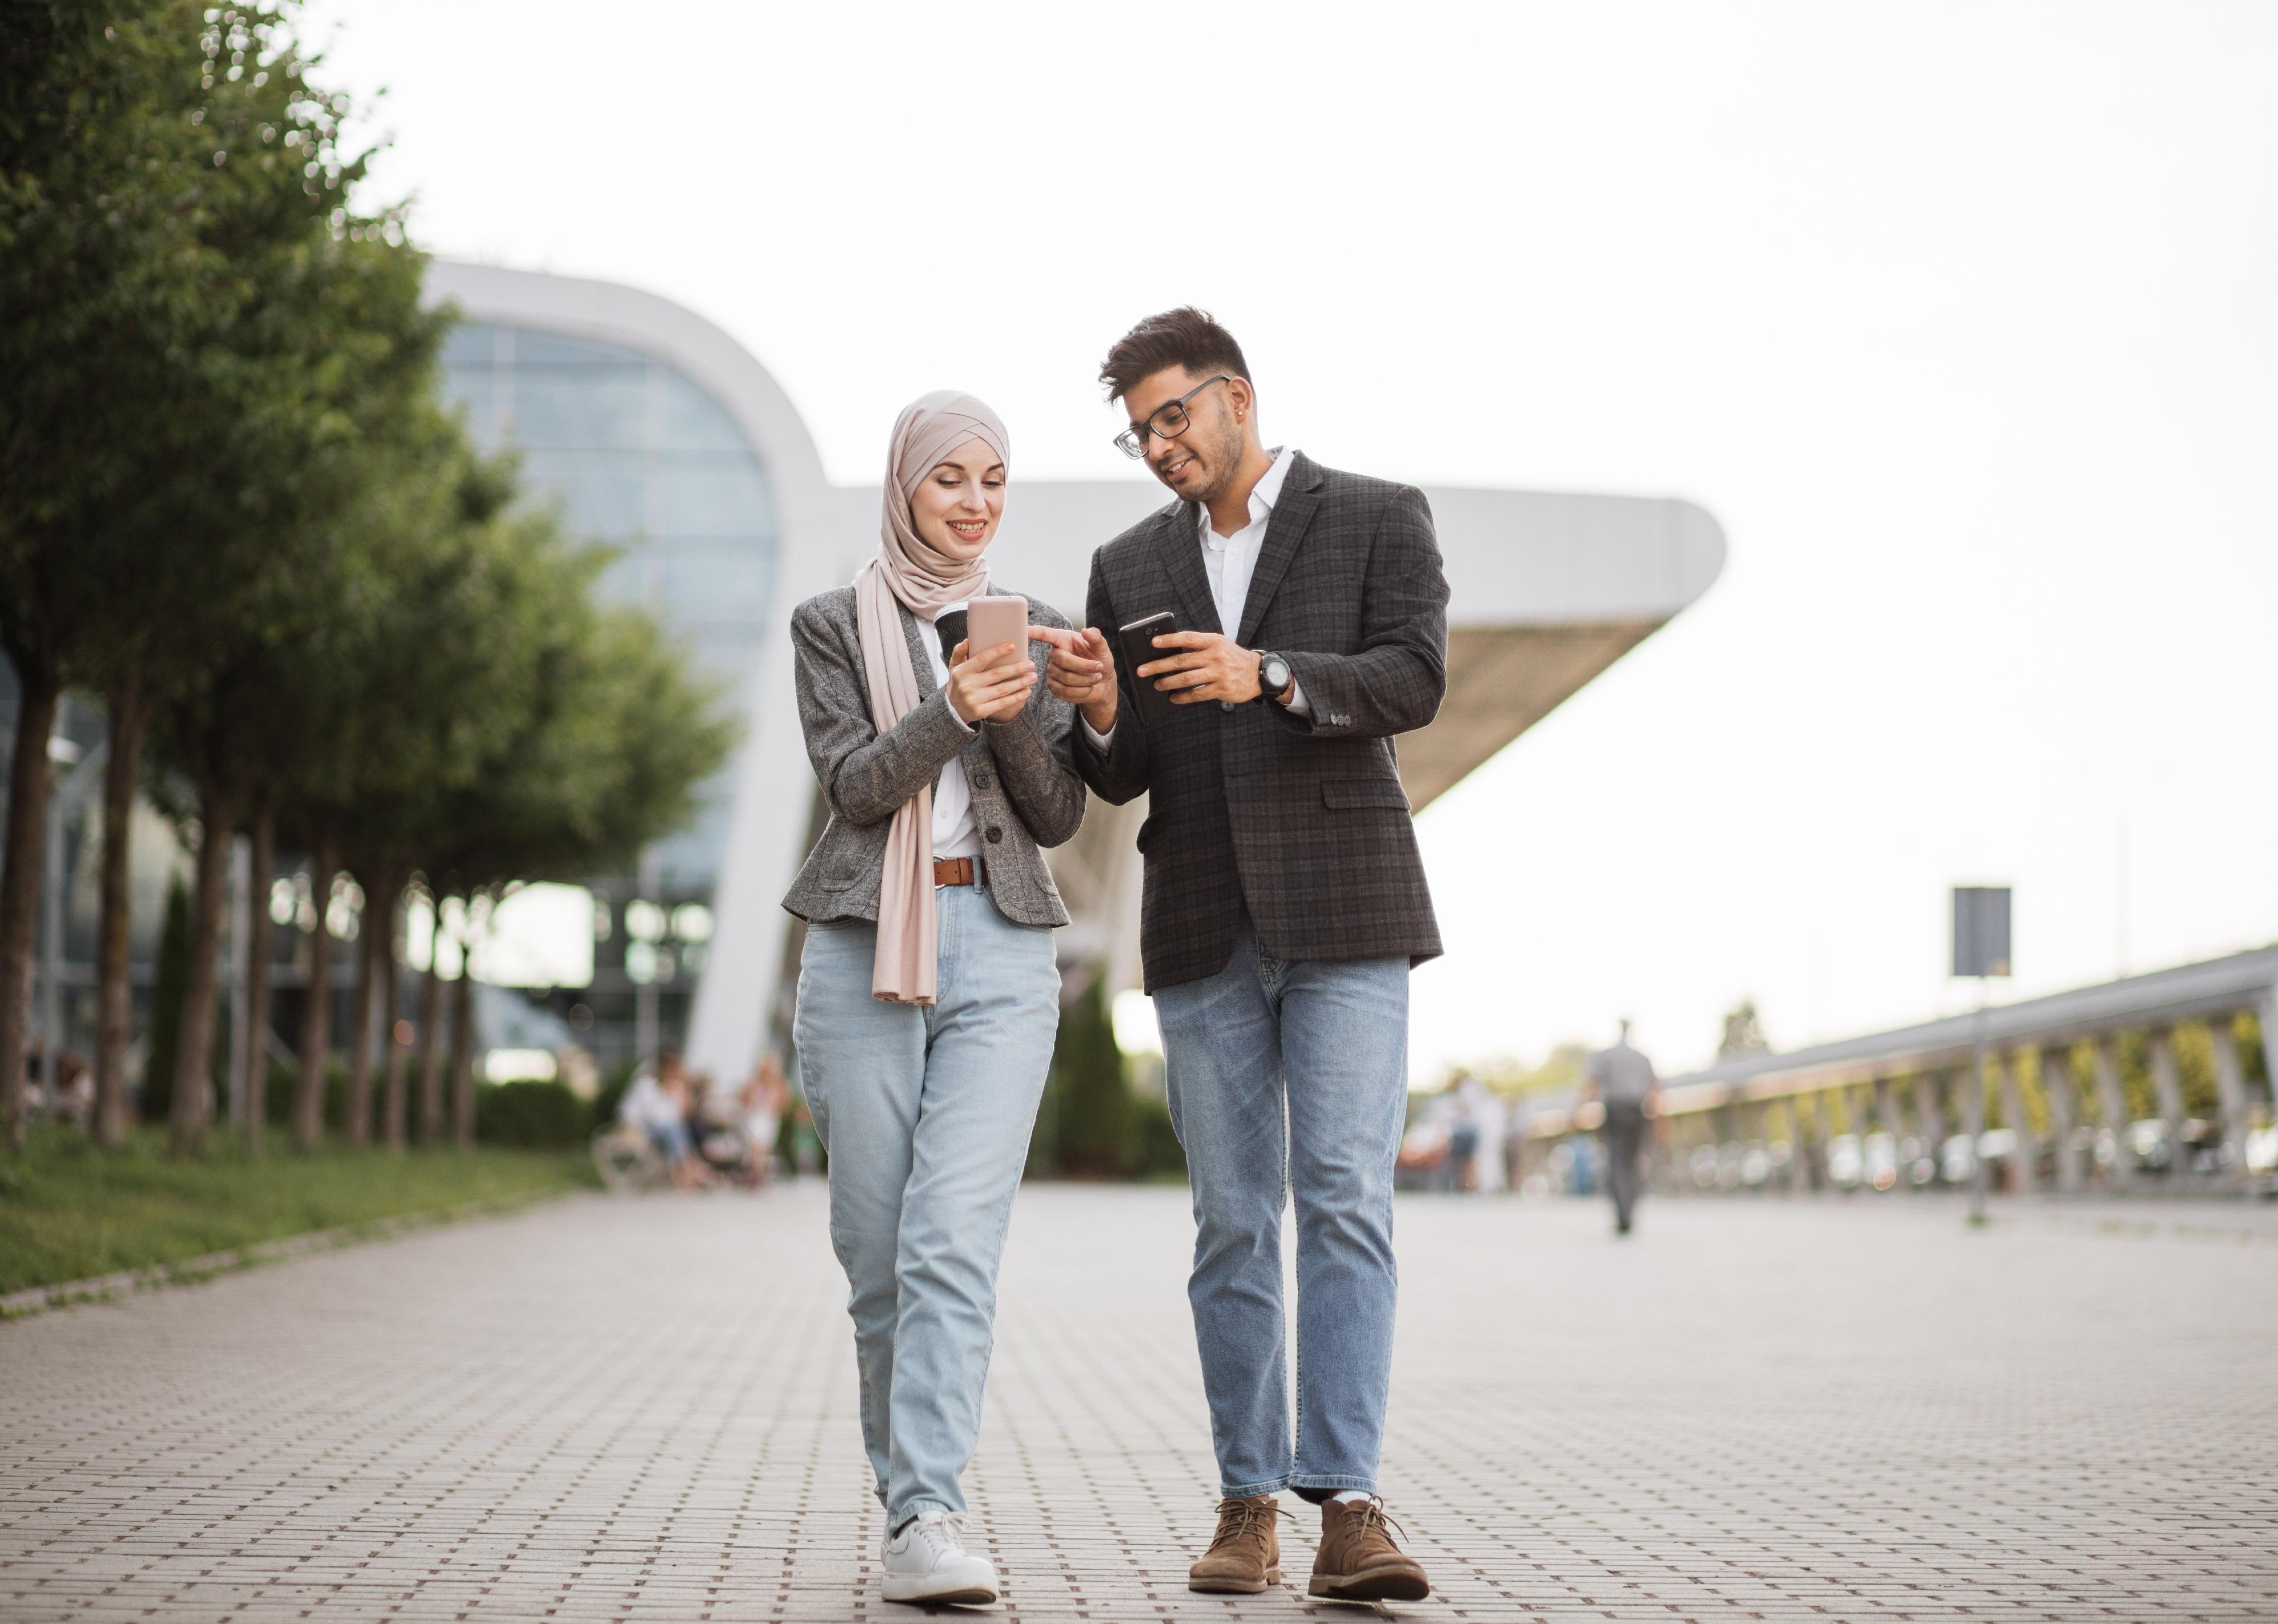 Front view of a man and woman walking on the street with smartphones.